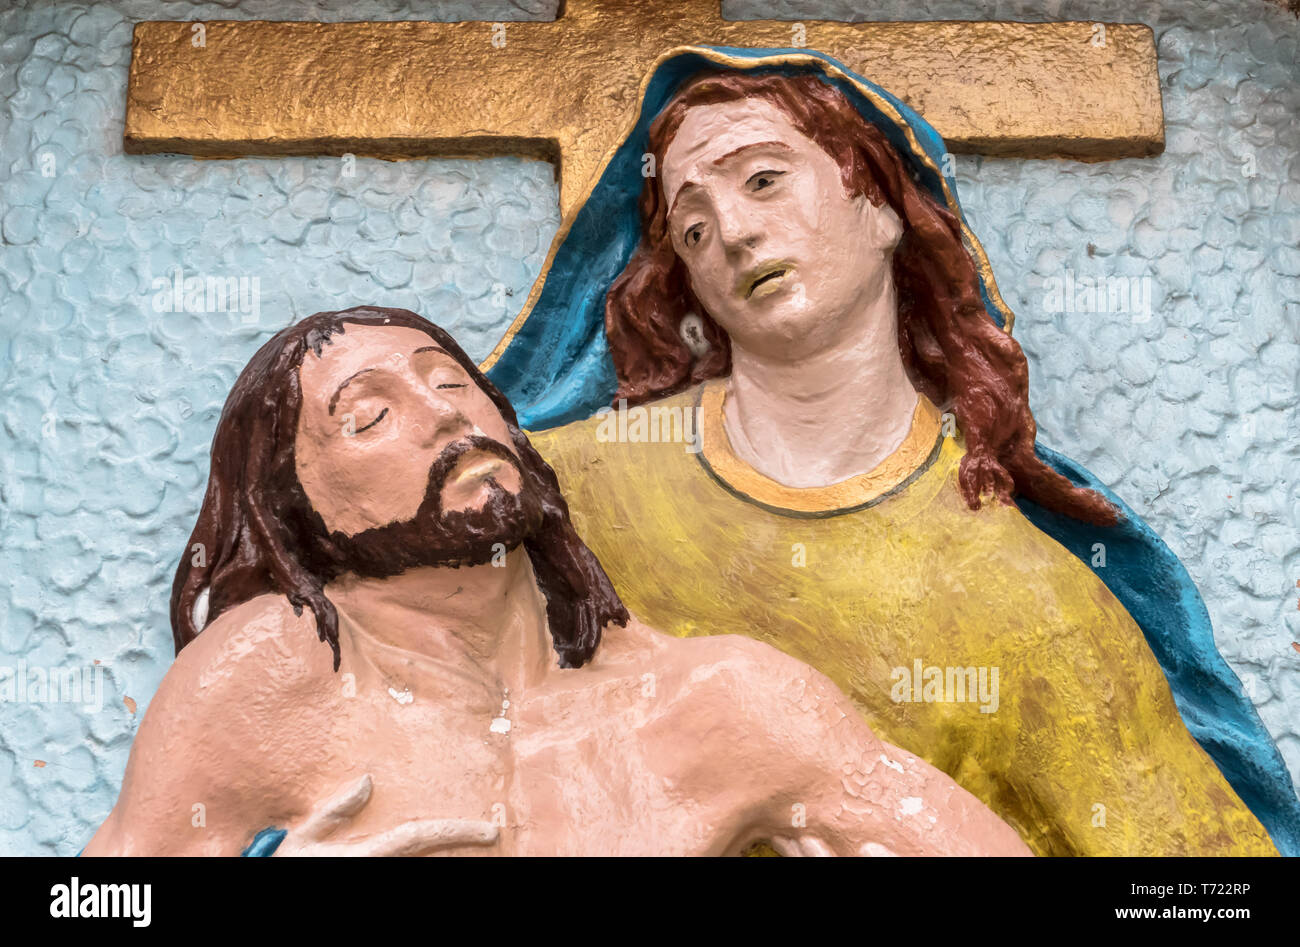 Religious stone statue in color representing The Pity of Michelangelo Stock Photo